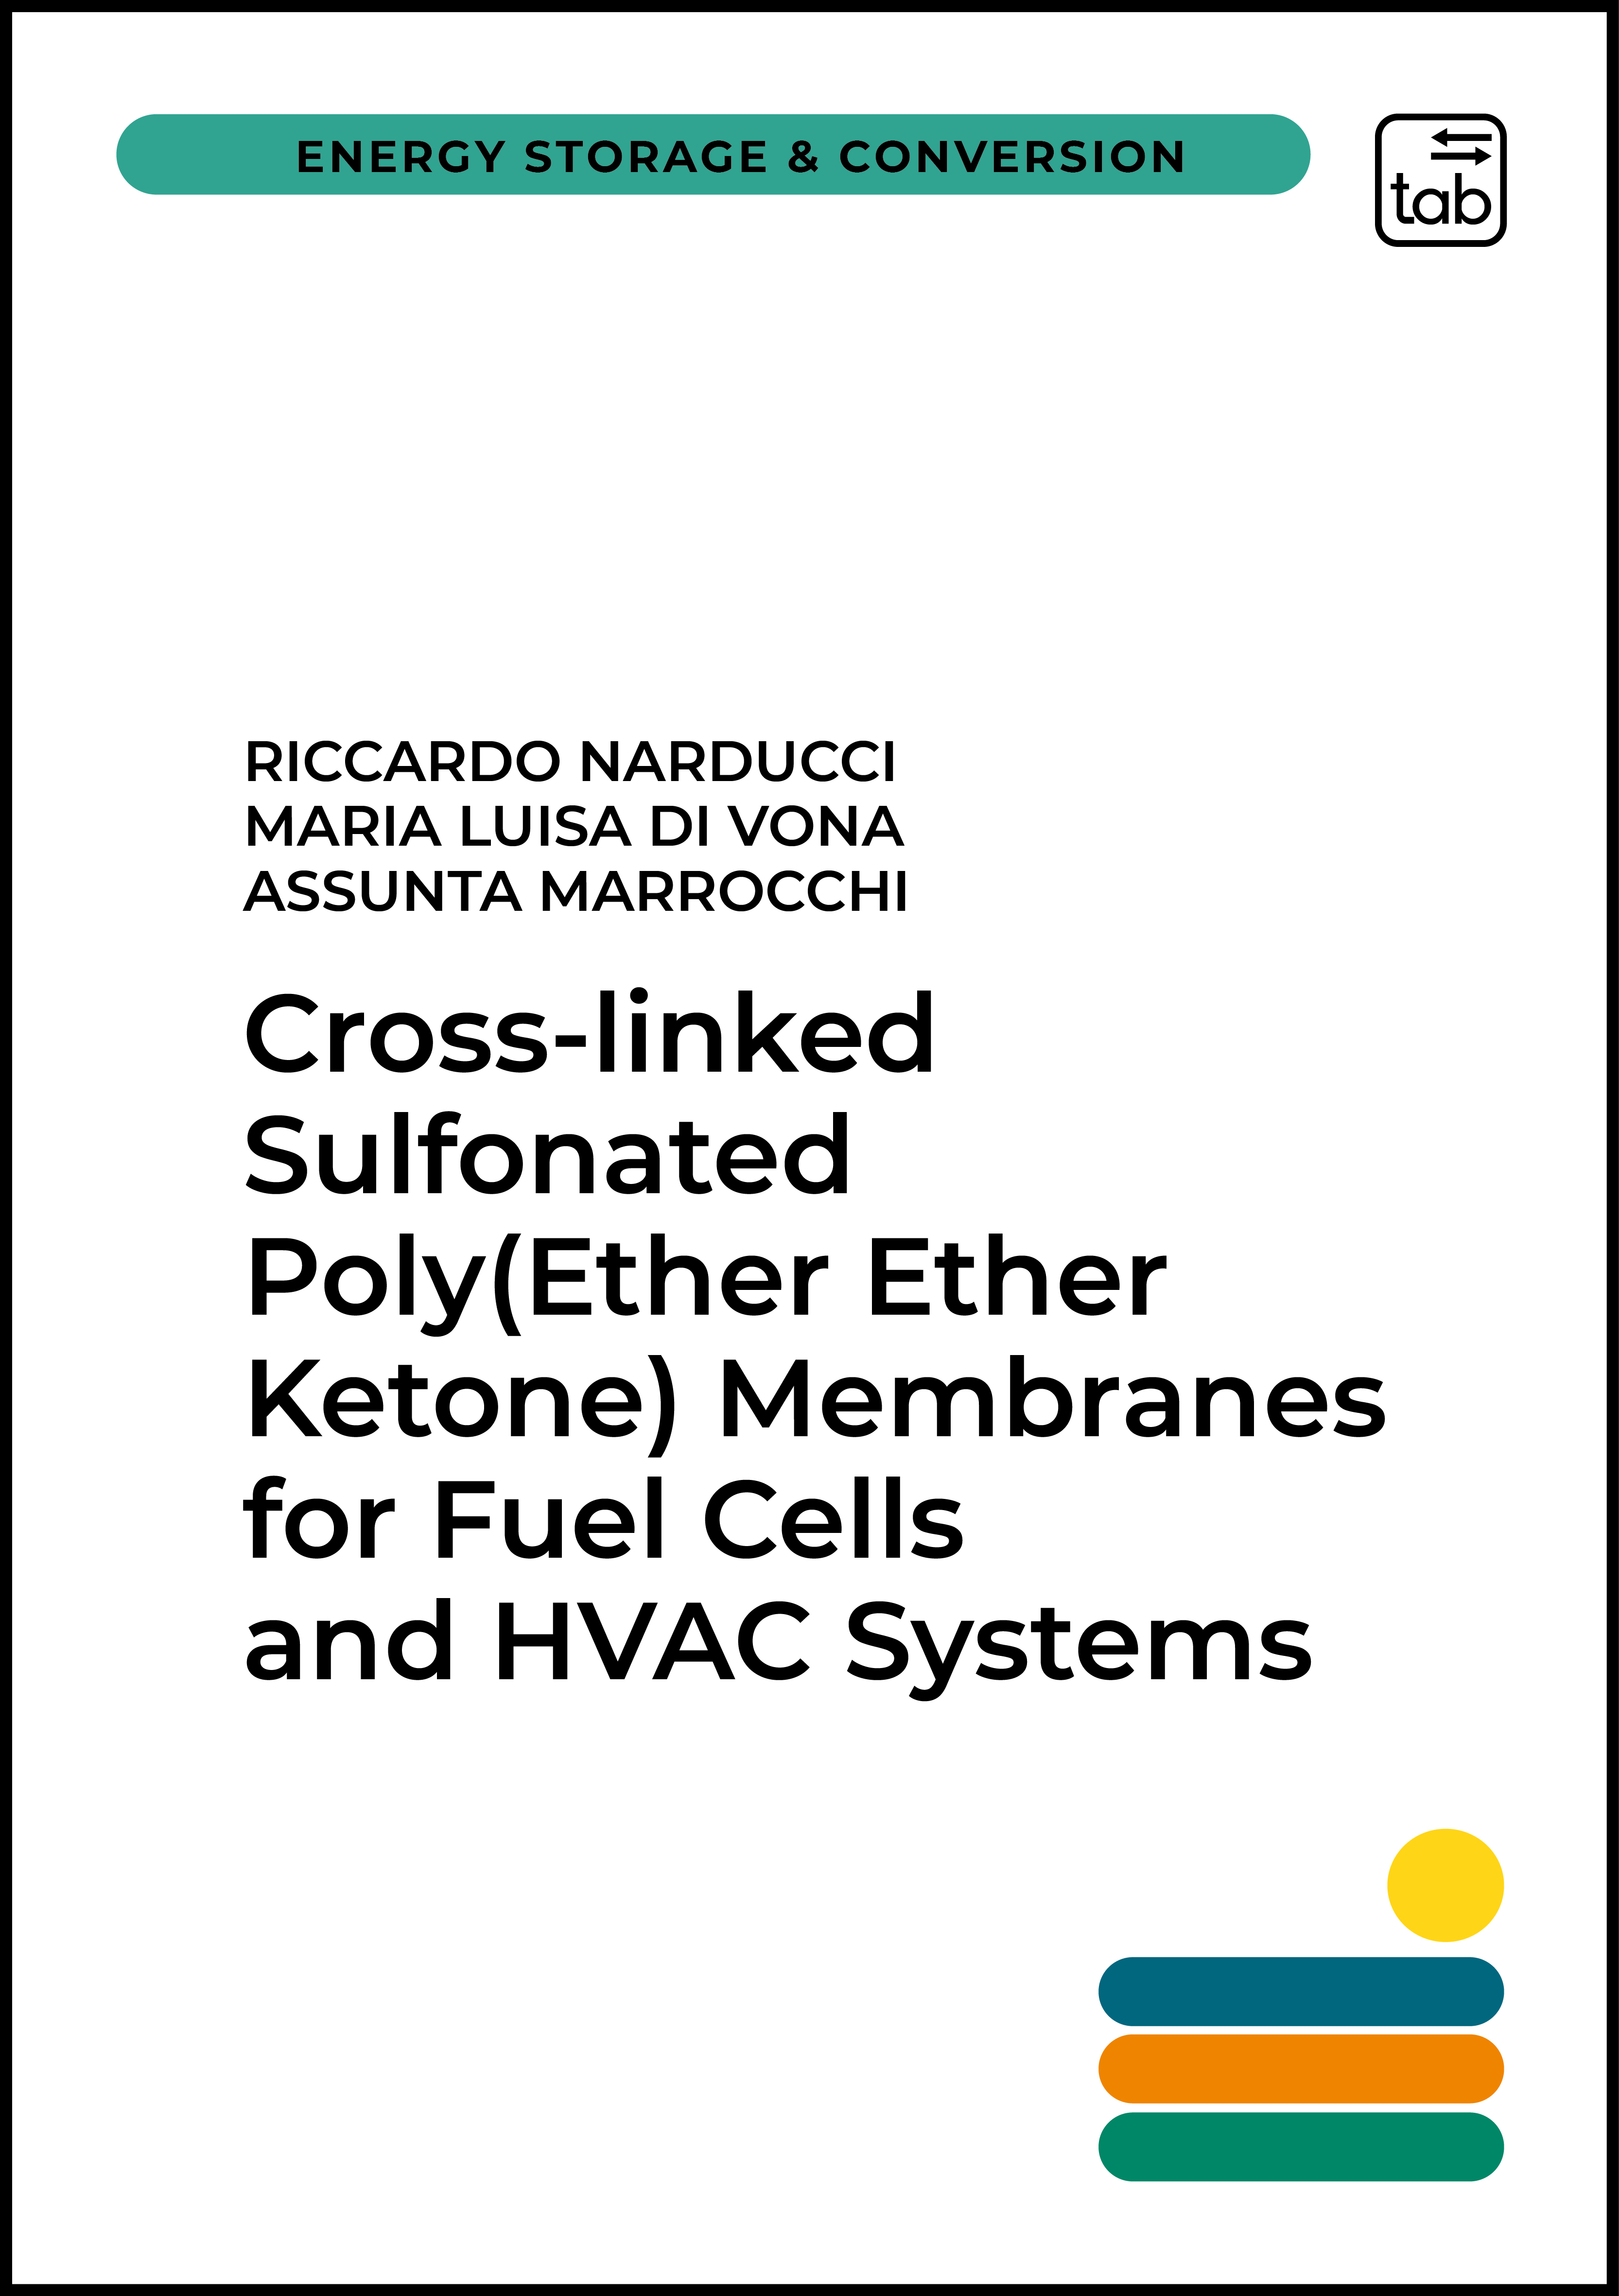 Cross-linked Sulfonated Poly(Ether Ether Ketone) Membranes for Fuel Cells and HVAC Systems